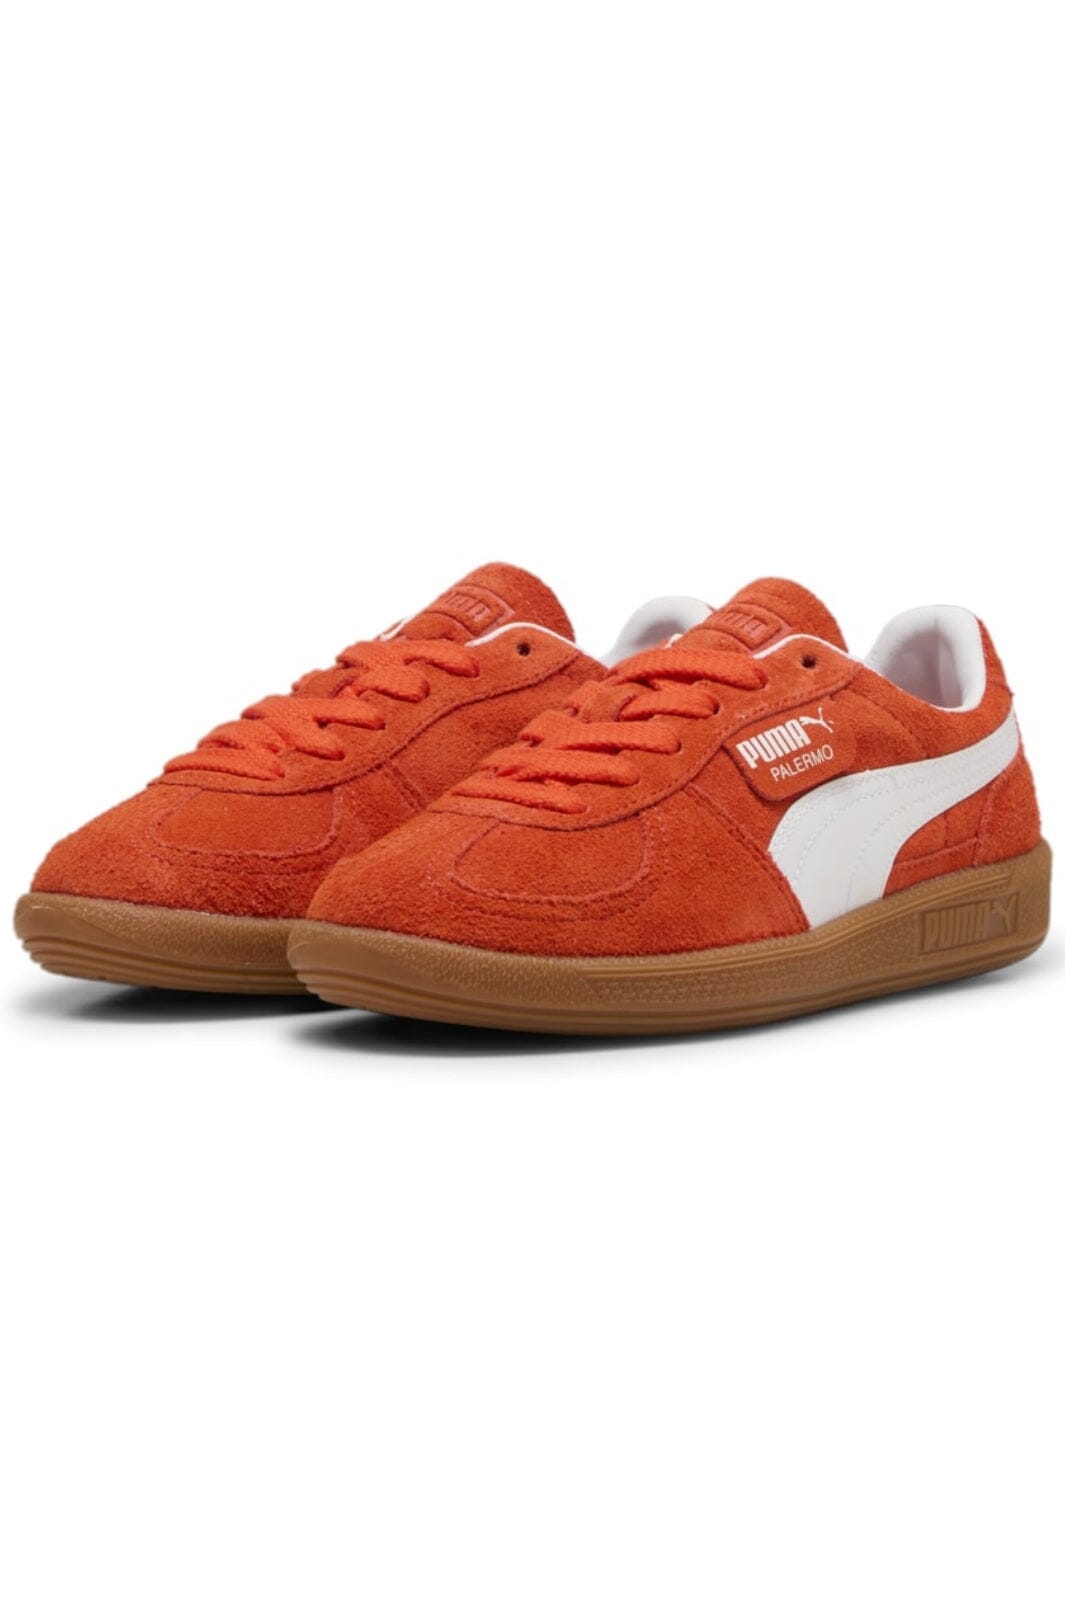 Puma - Palermo Jr - Red 10 Sneakers 